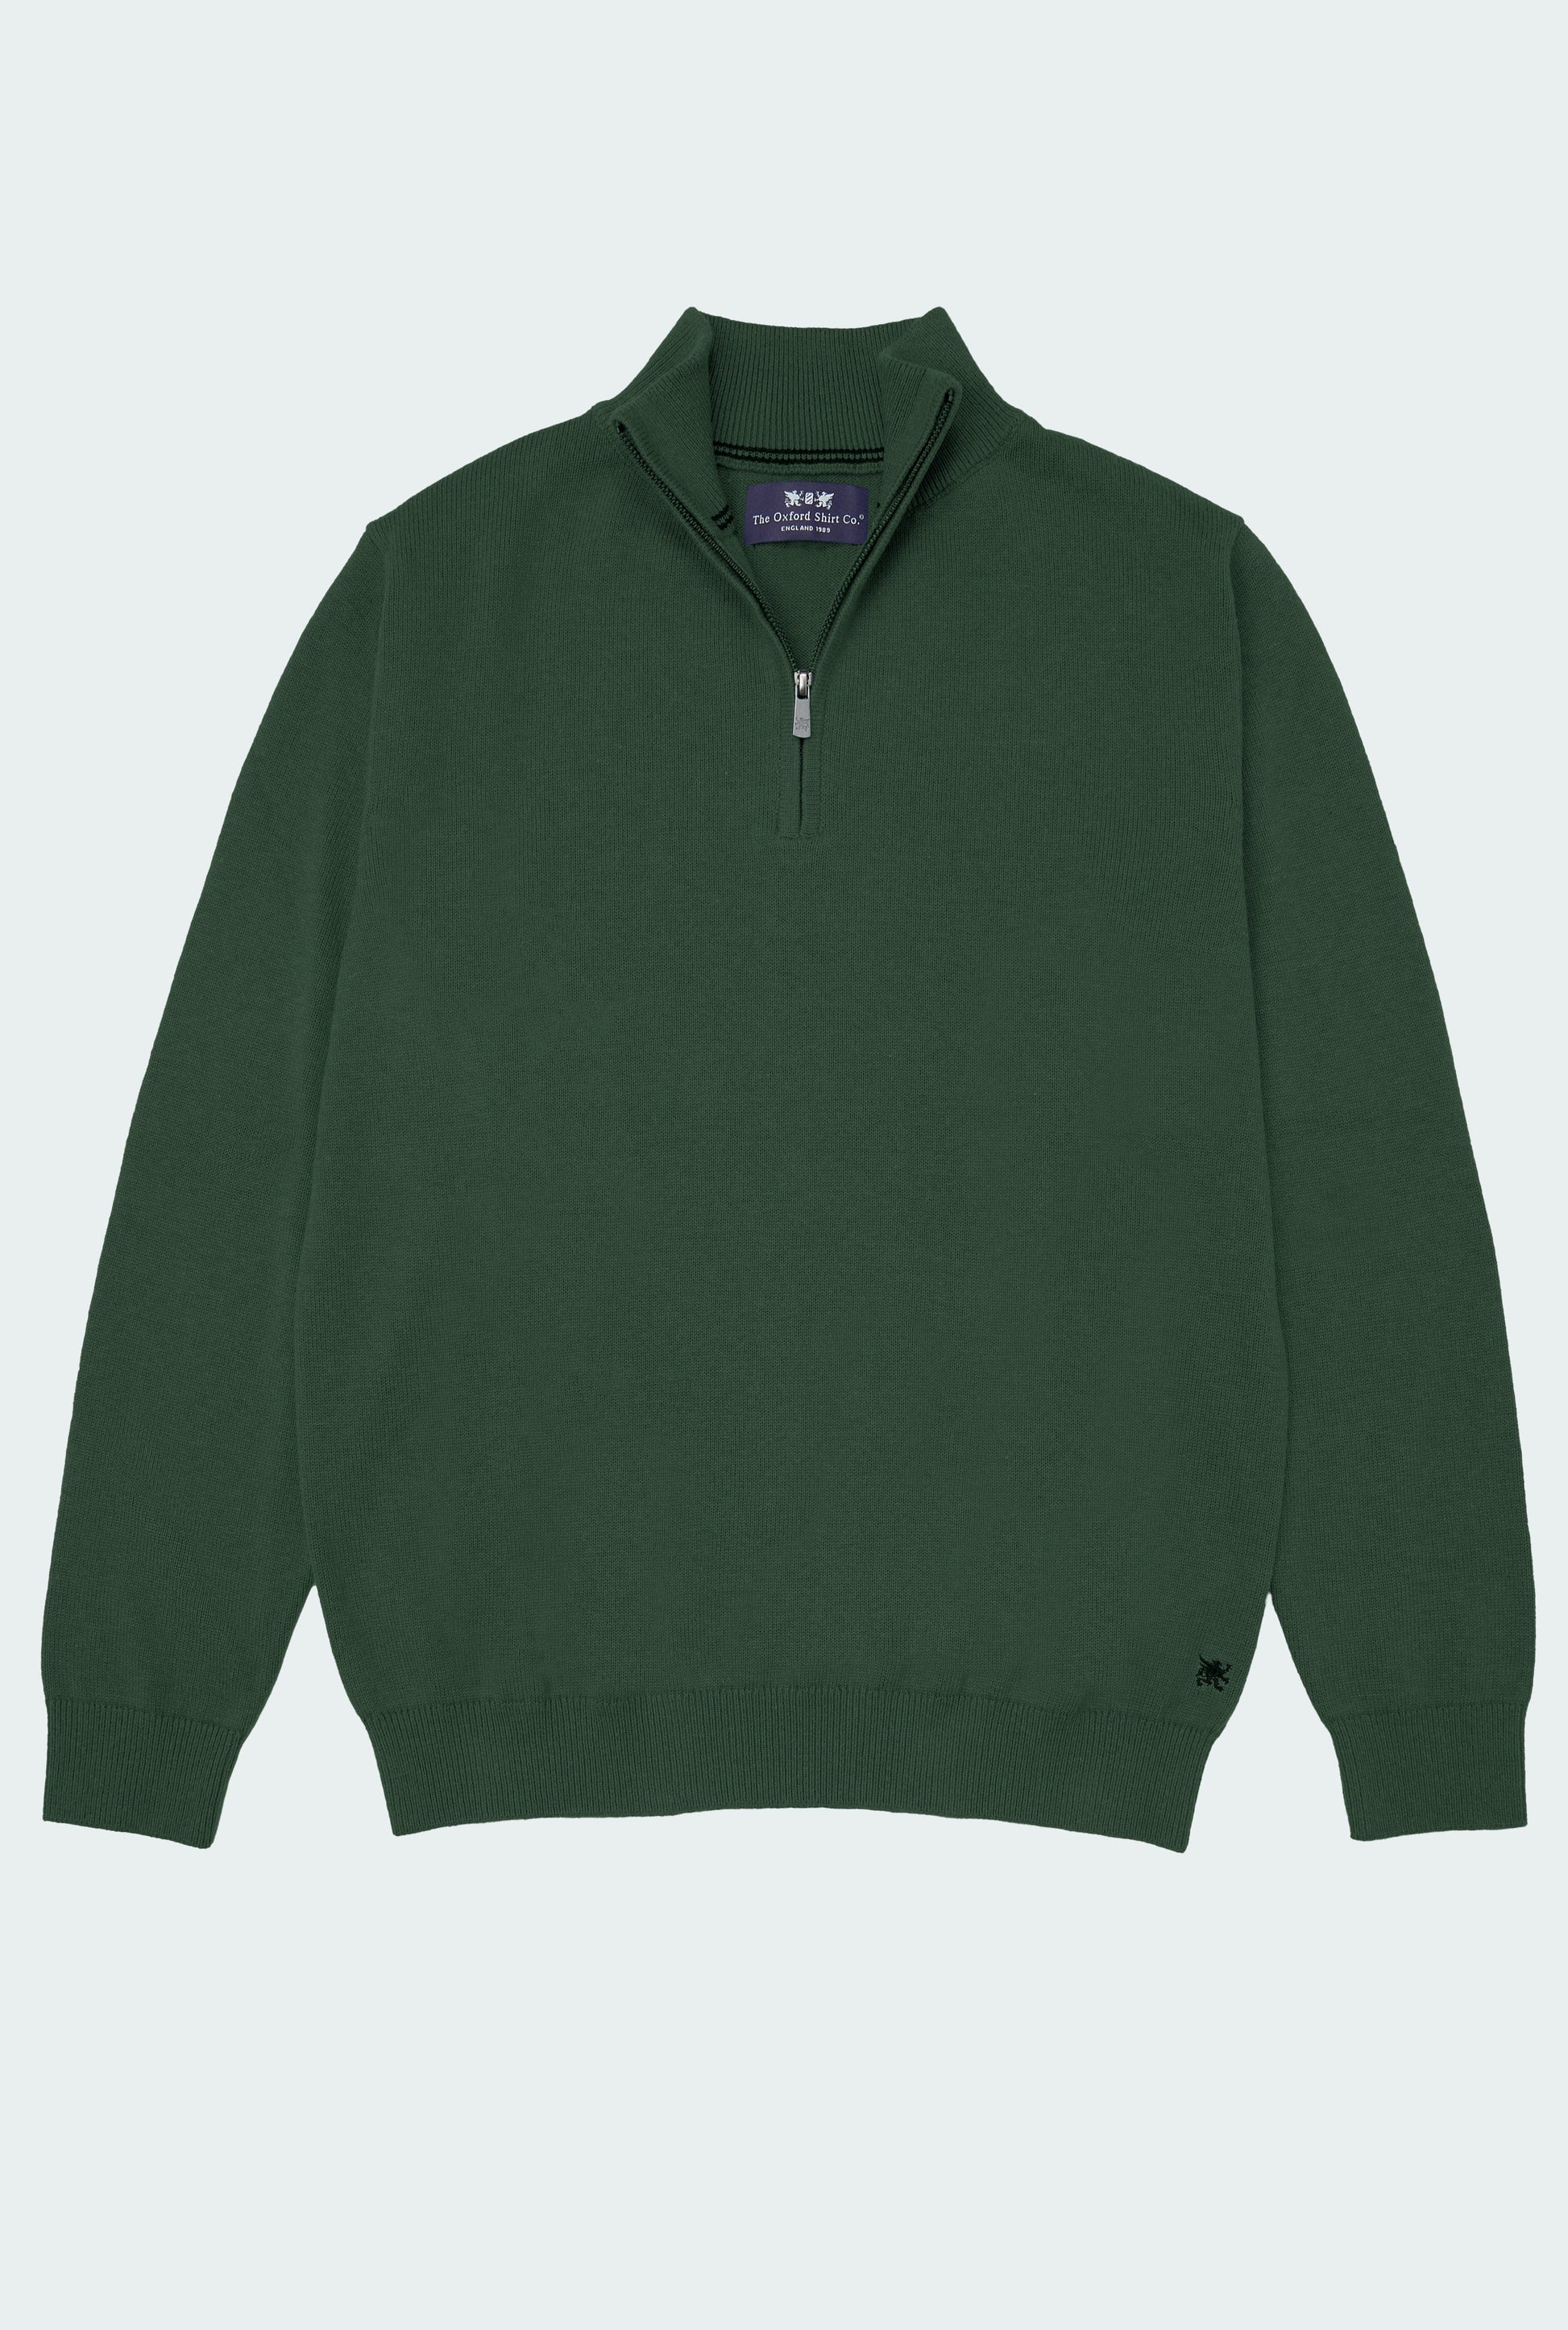 Mens Cotton Cashmere 1/4 Zip Jumper in Pea Green - Oxford Shirt Co.